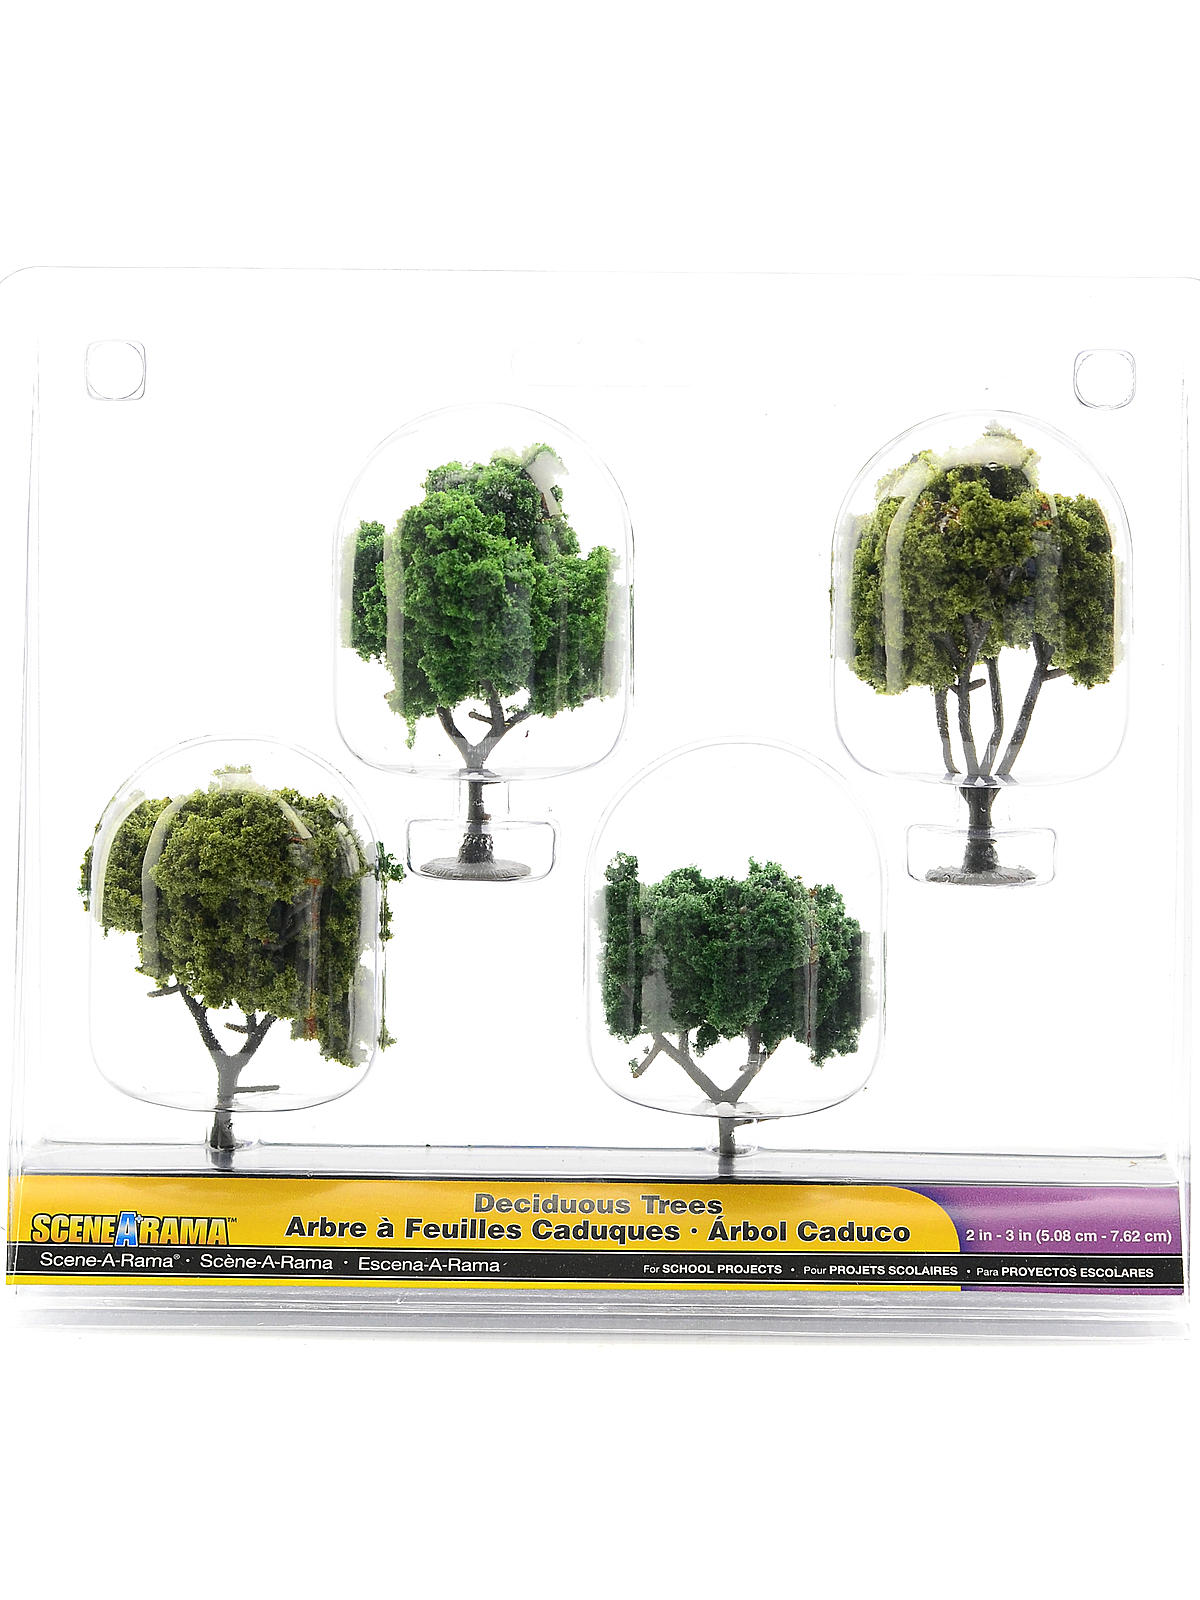 Deciduous Trees 2 In. X 3 In. Pack Of 4